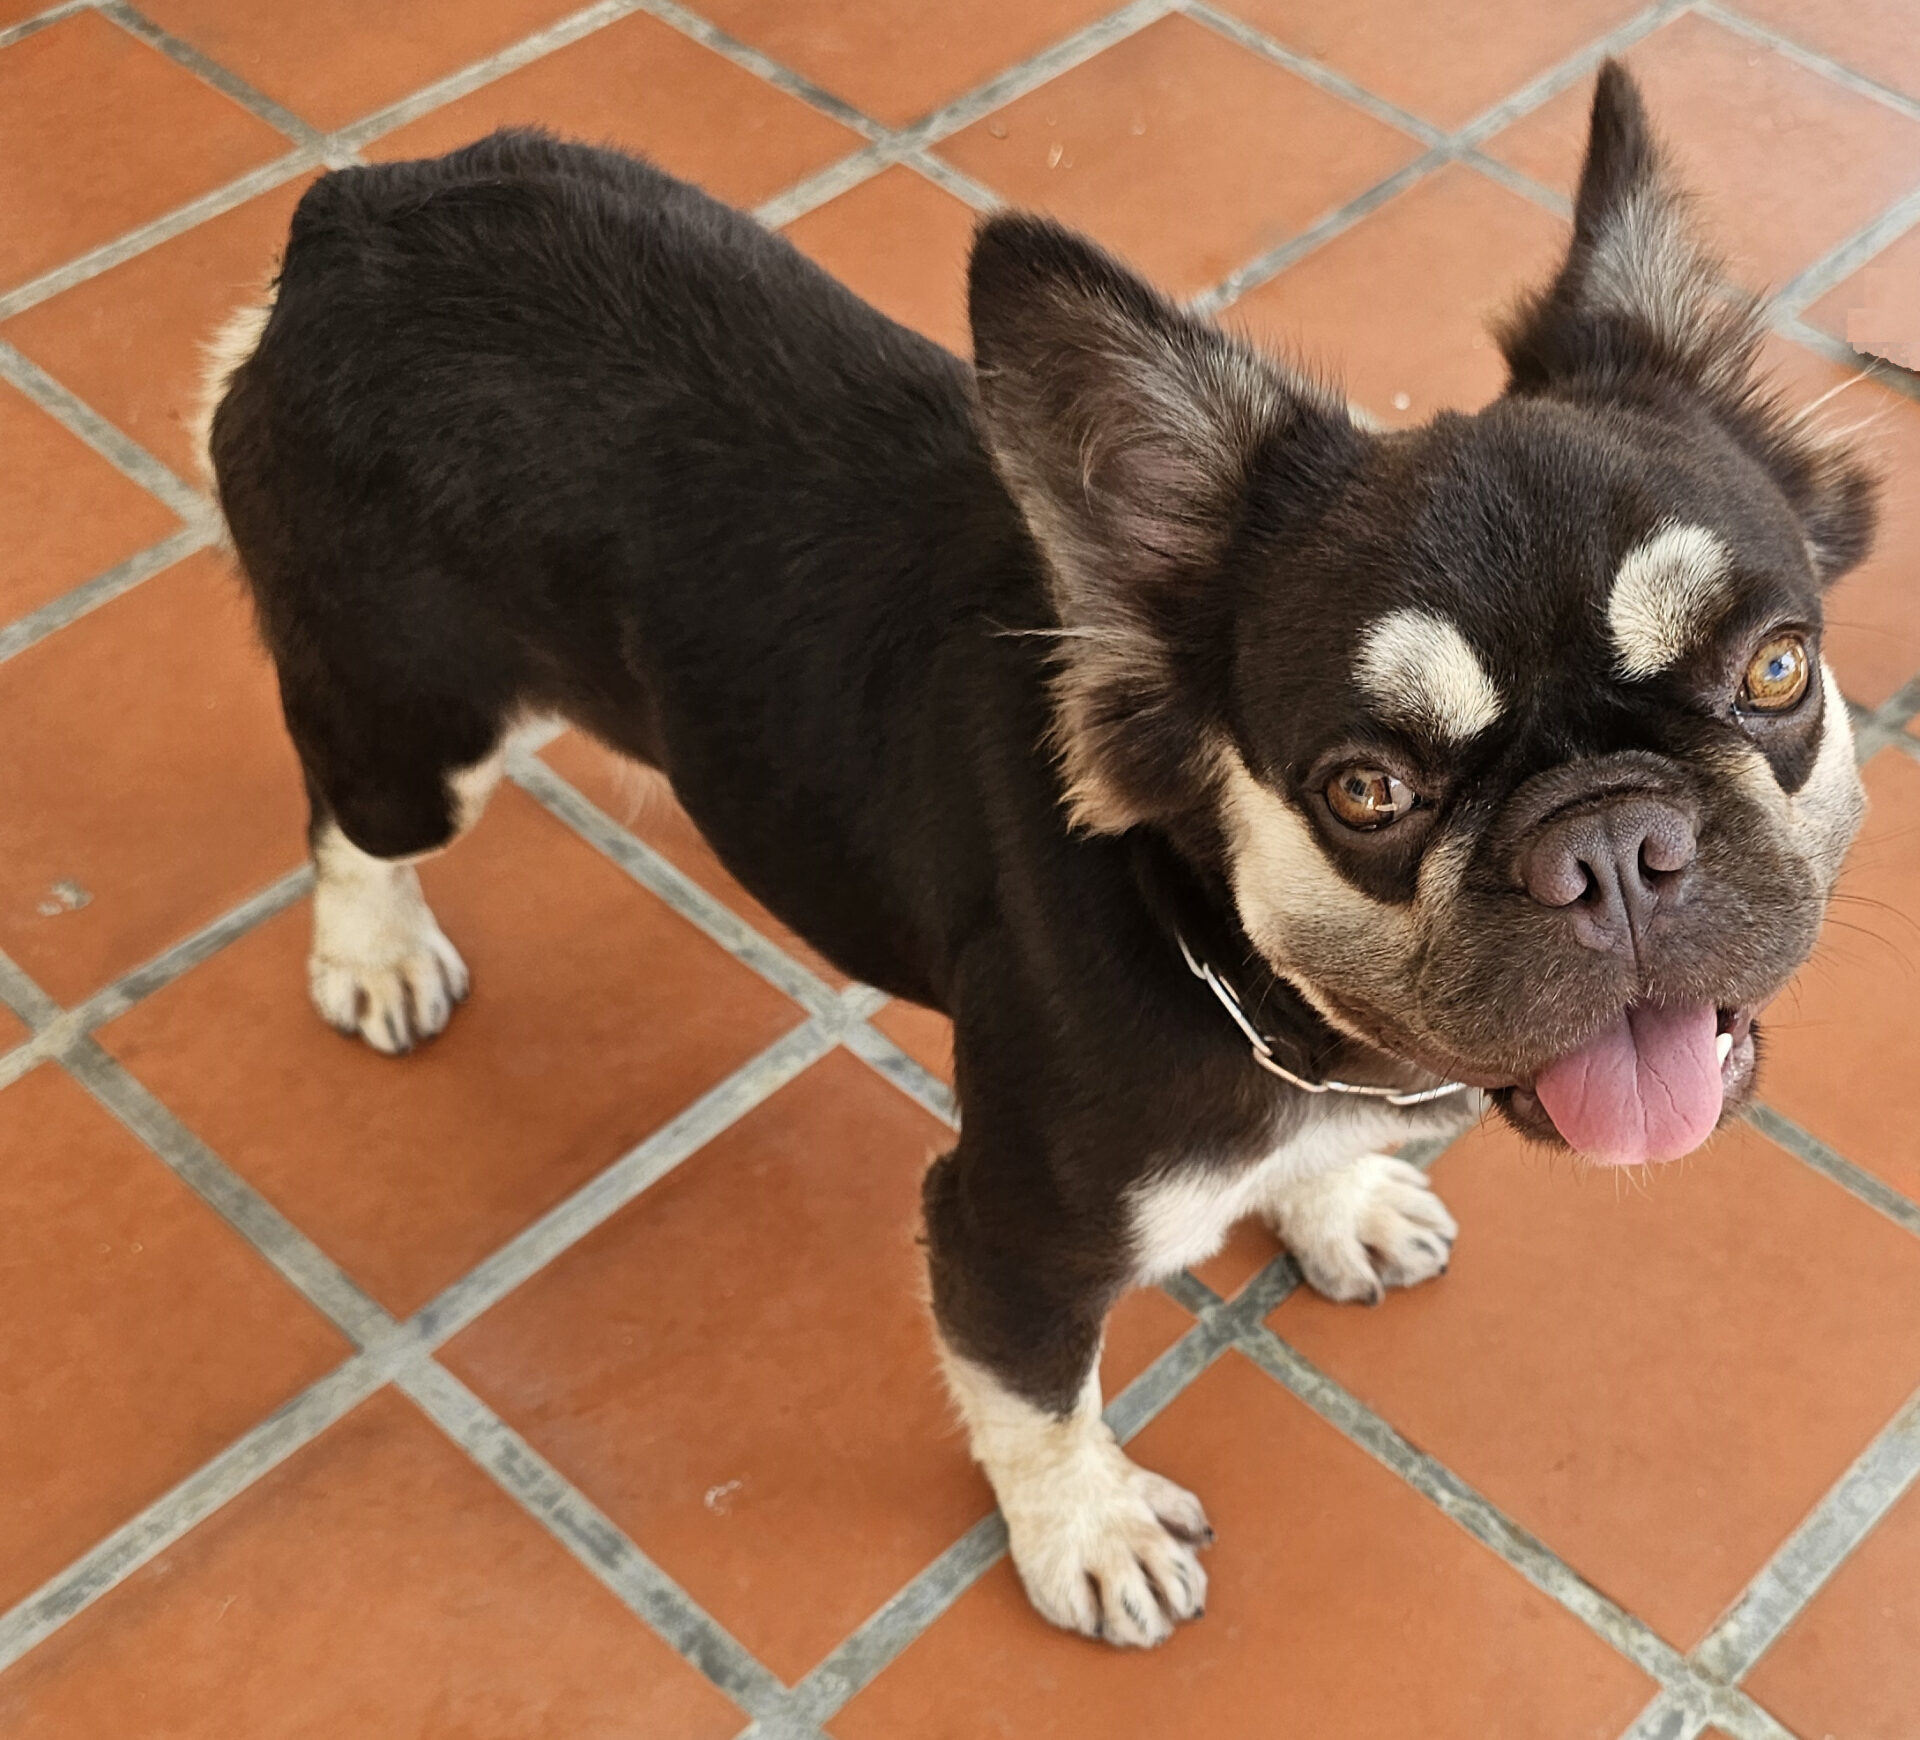 A small, black and tan dog with a distinctive facial mask and a tongue out, standing on a terracotta tiled floor.